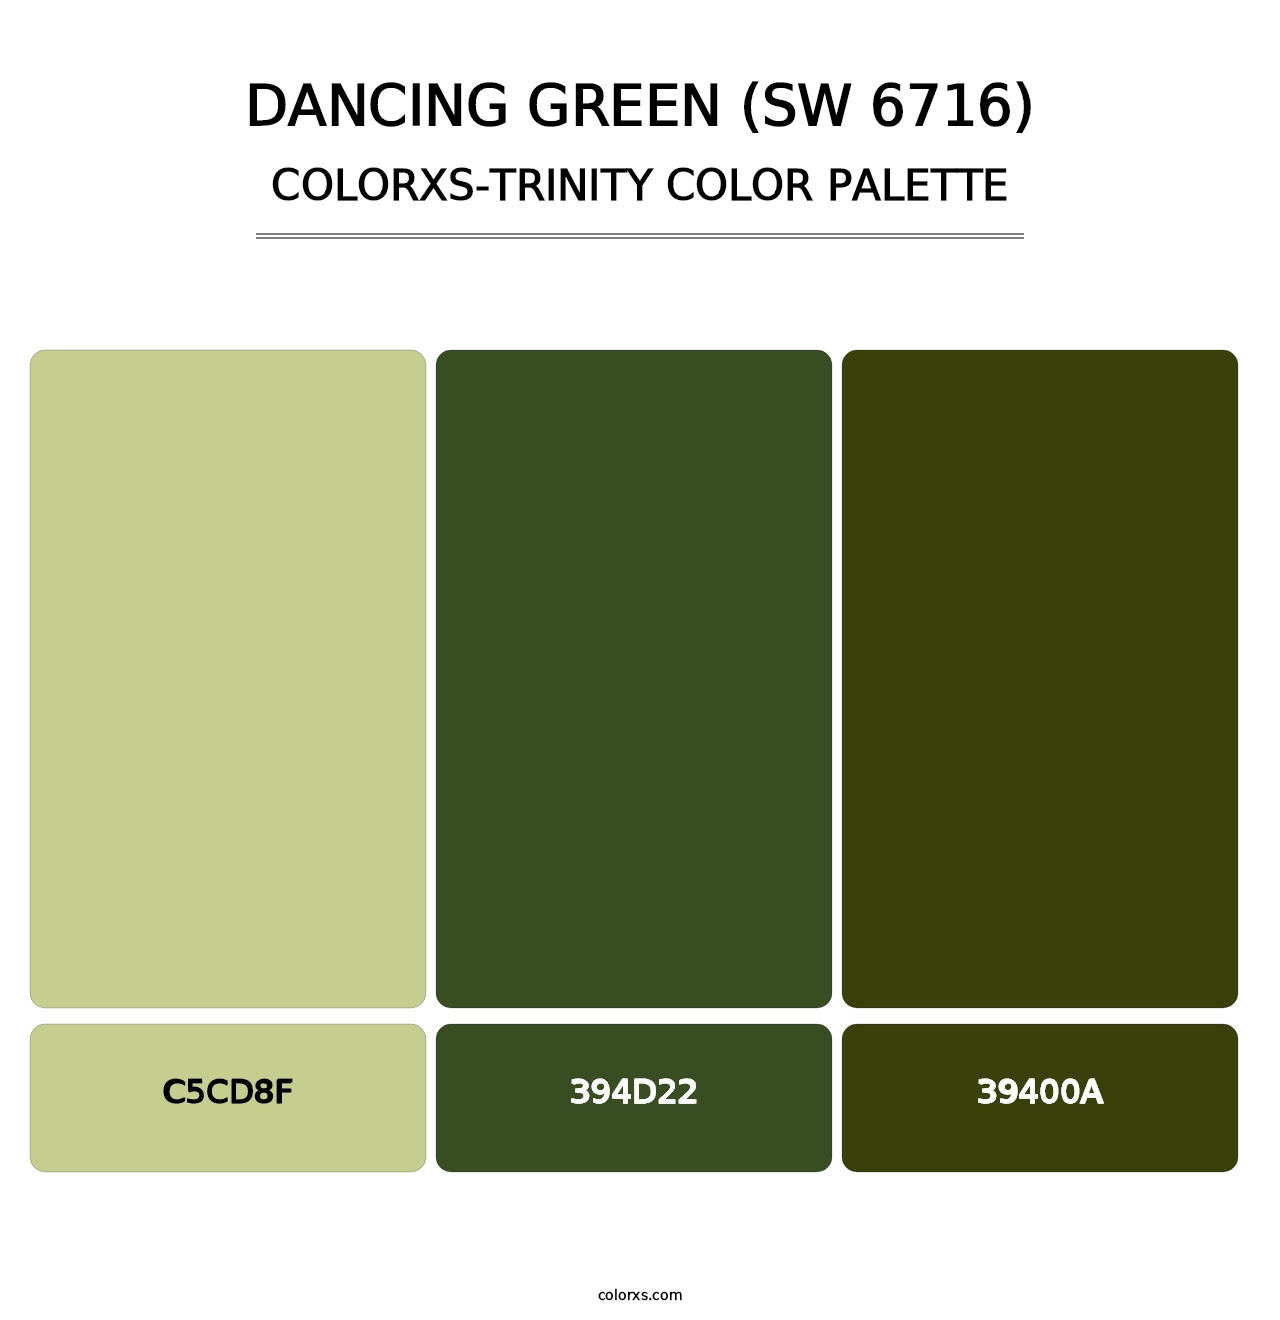 Dancing Green (SW 6716) - Colorxs Trinity Palette